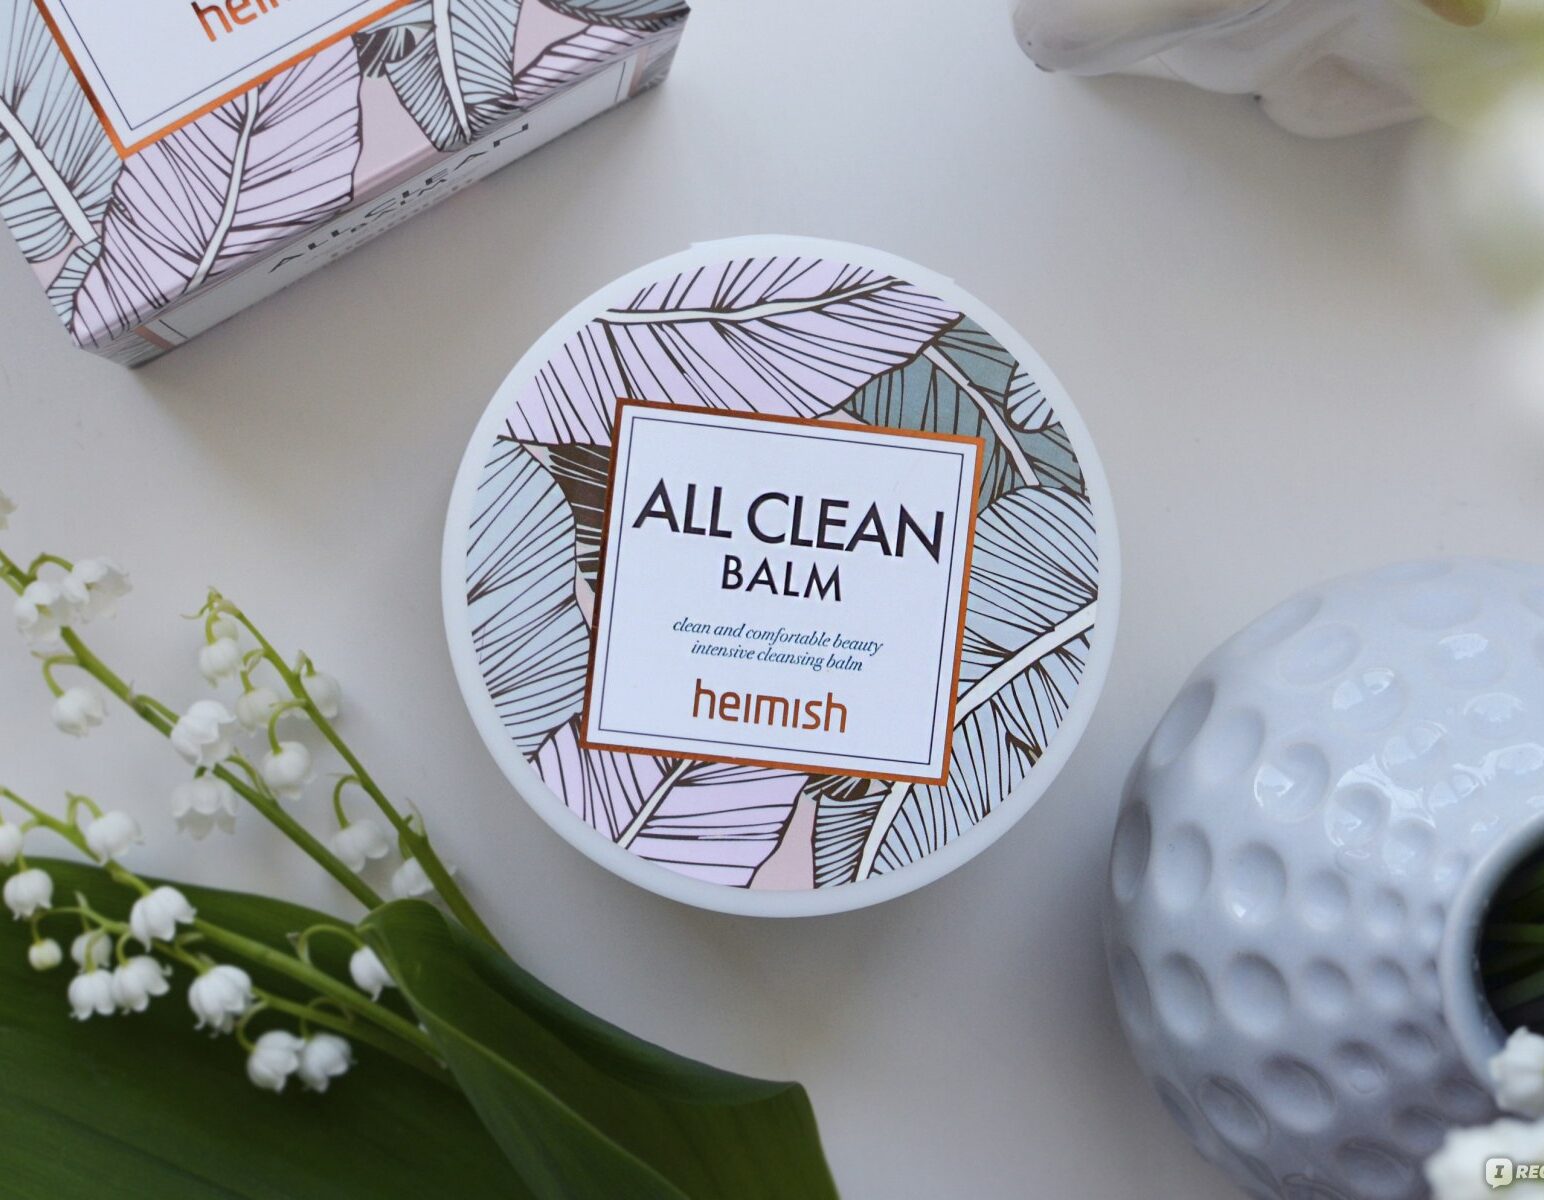 Try Heimish All Clean Balm to deeply cleanse your face!